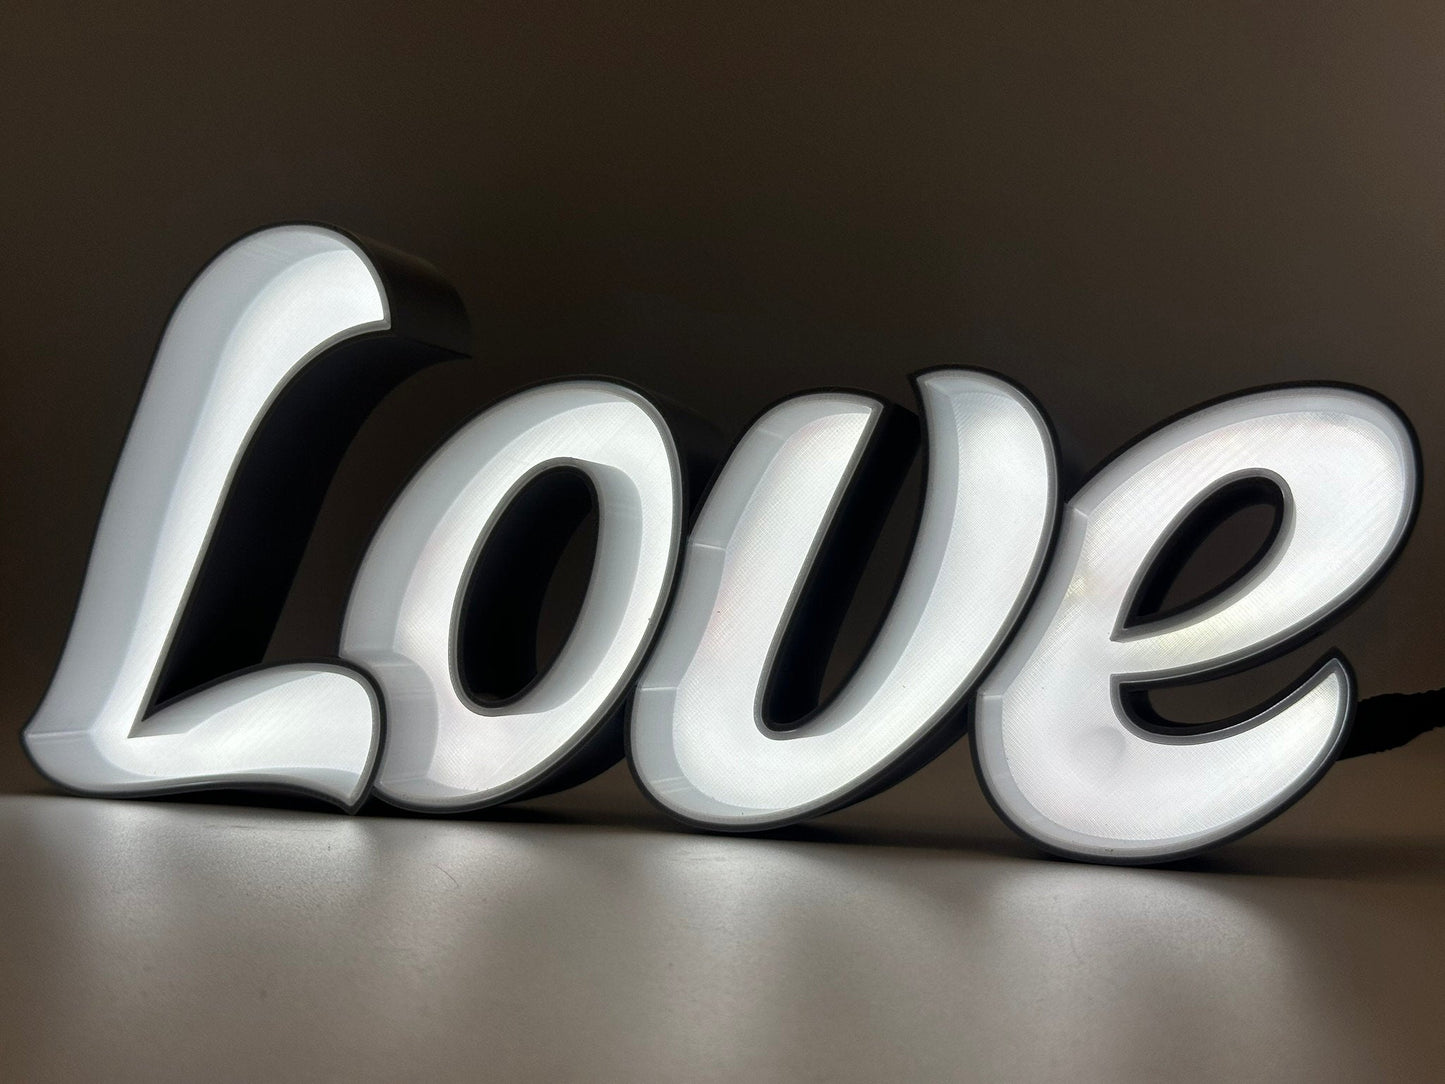 Love dimmable led sign / Love sign décor / love sign self standing / 3d printed love sign - Rude Grain